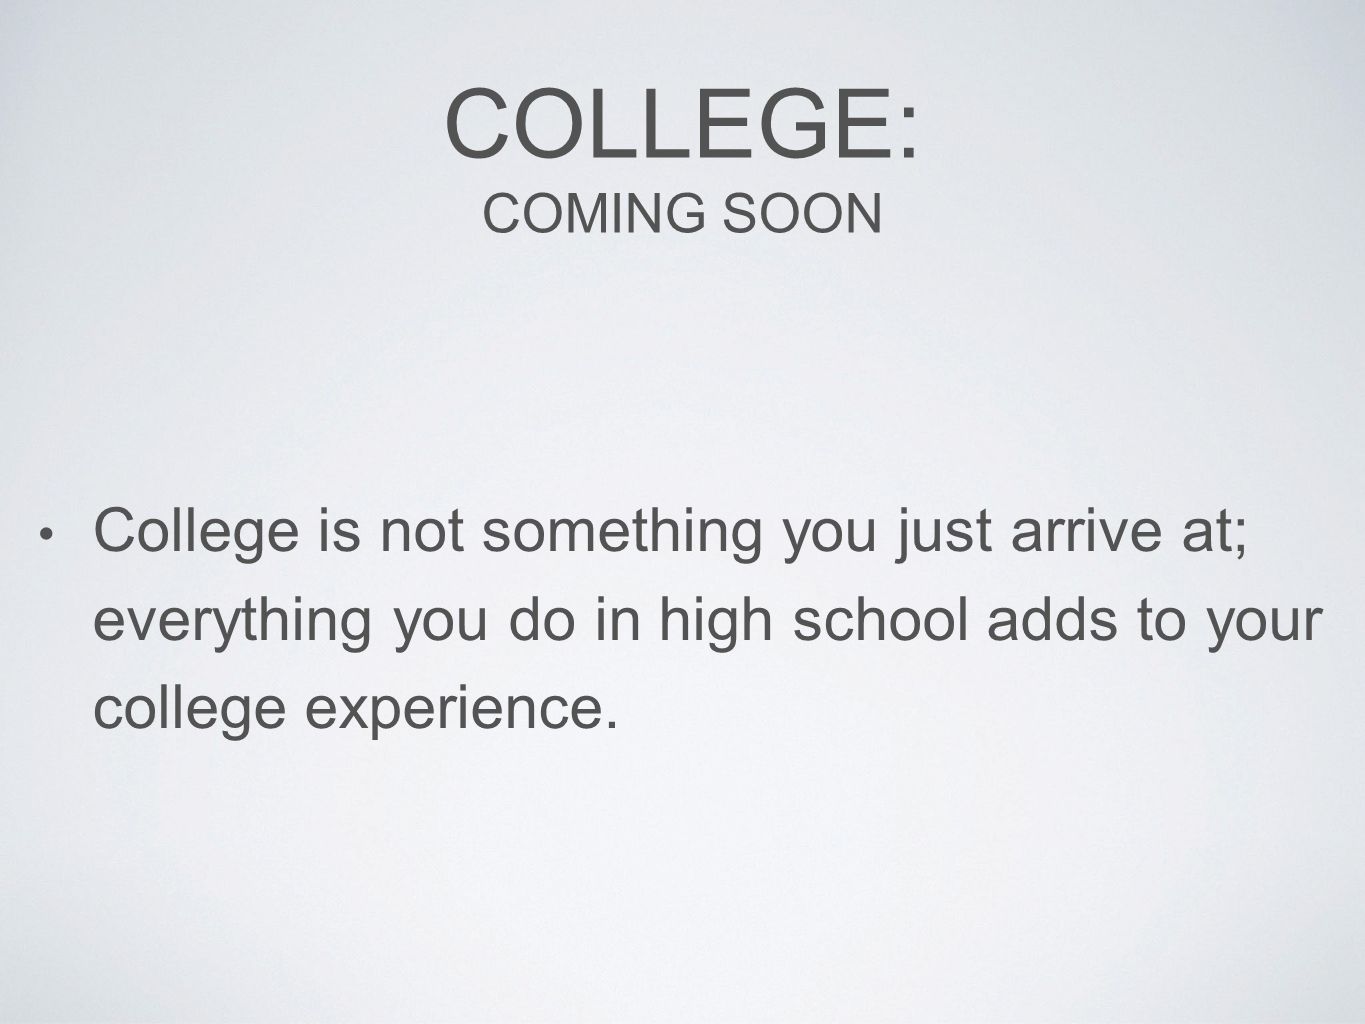 COLLEGE: COMING SOON College is not something you just arrive at; everything you do in high school adds to your college experience.